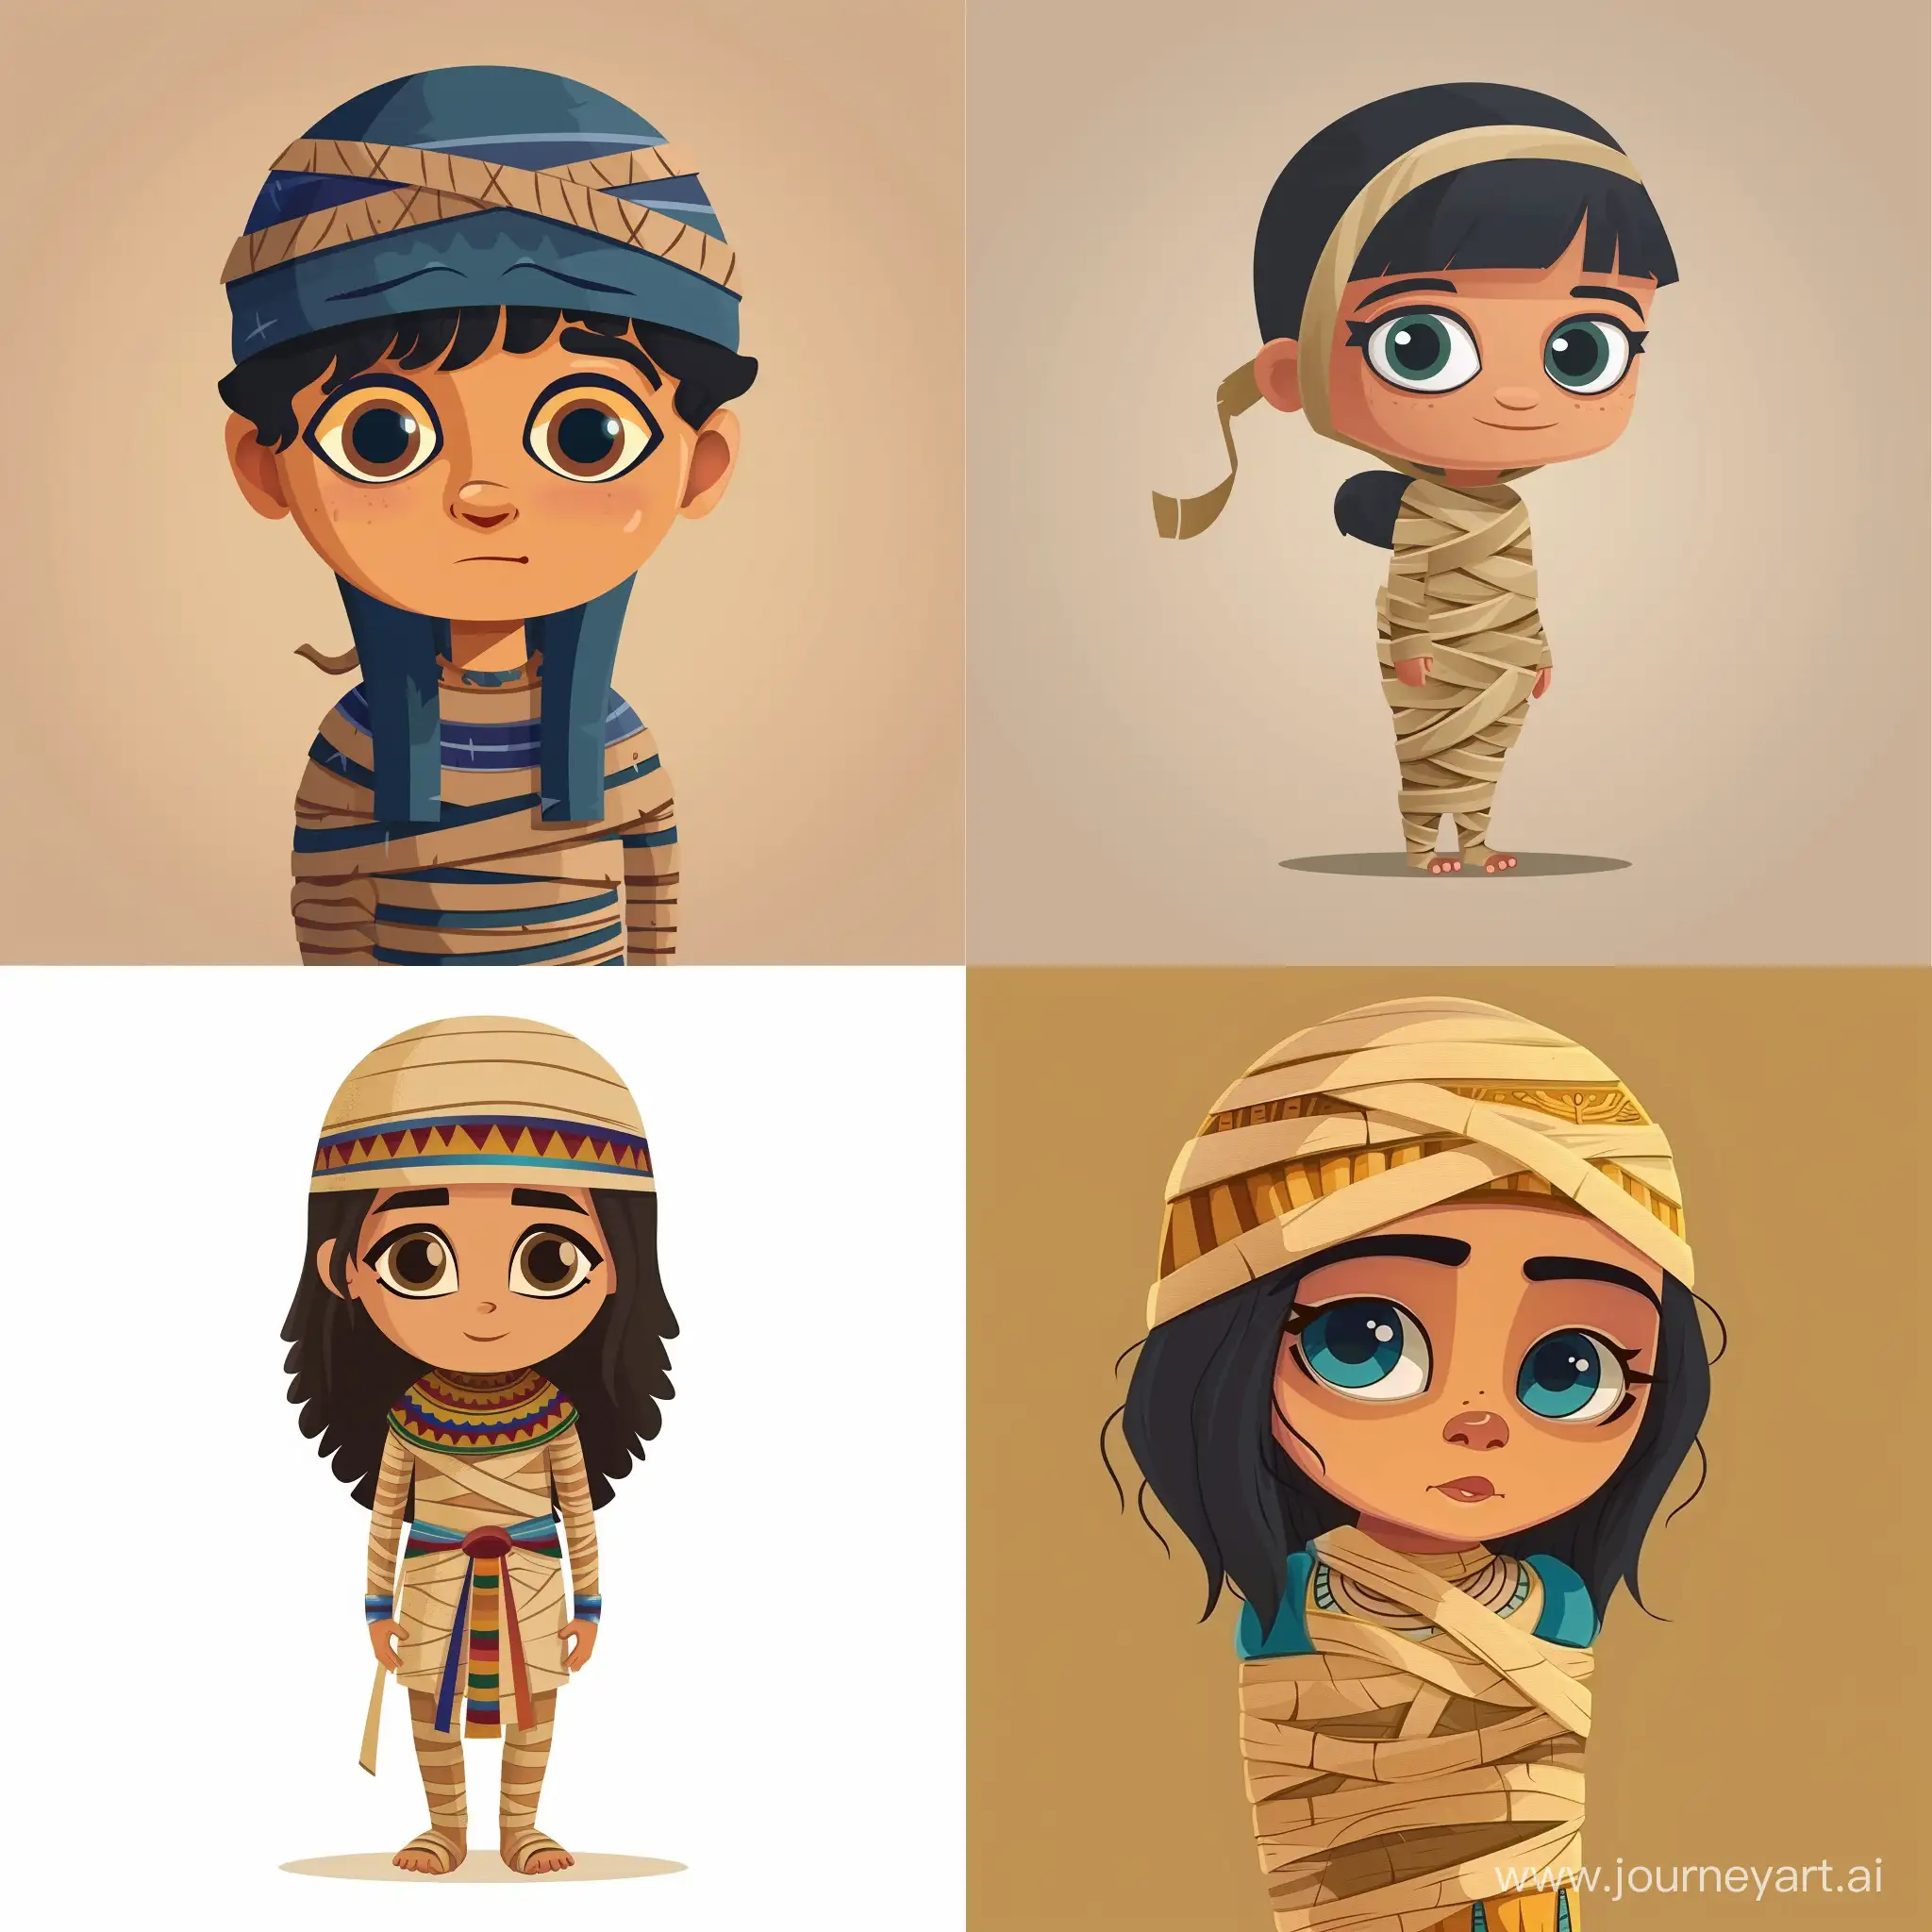 Adorable-Cartoon-Egyptian-Mummy-Child-Cute-and-Funny-Illustration